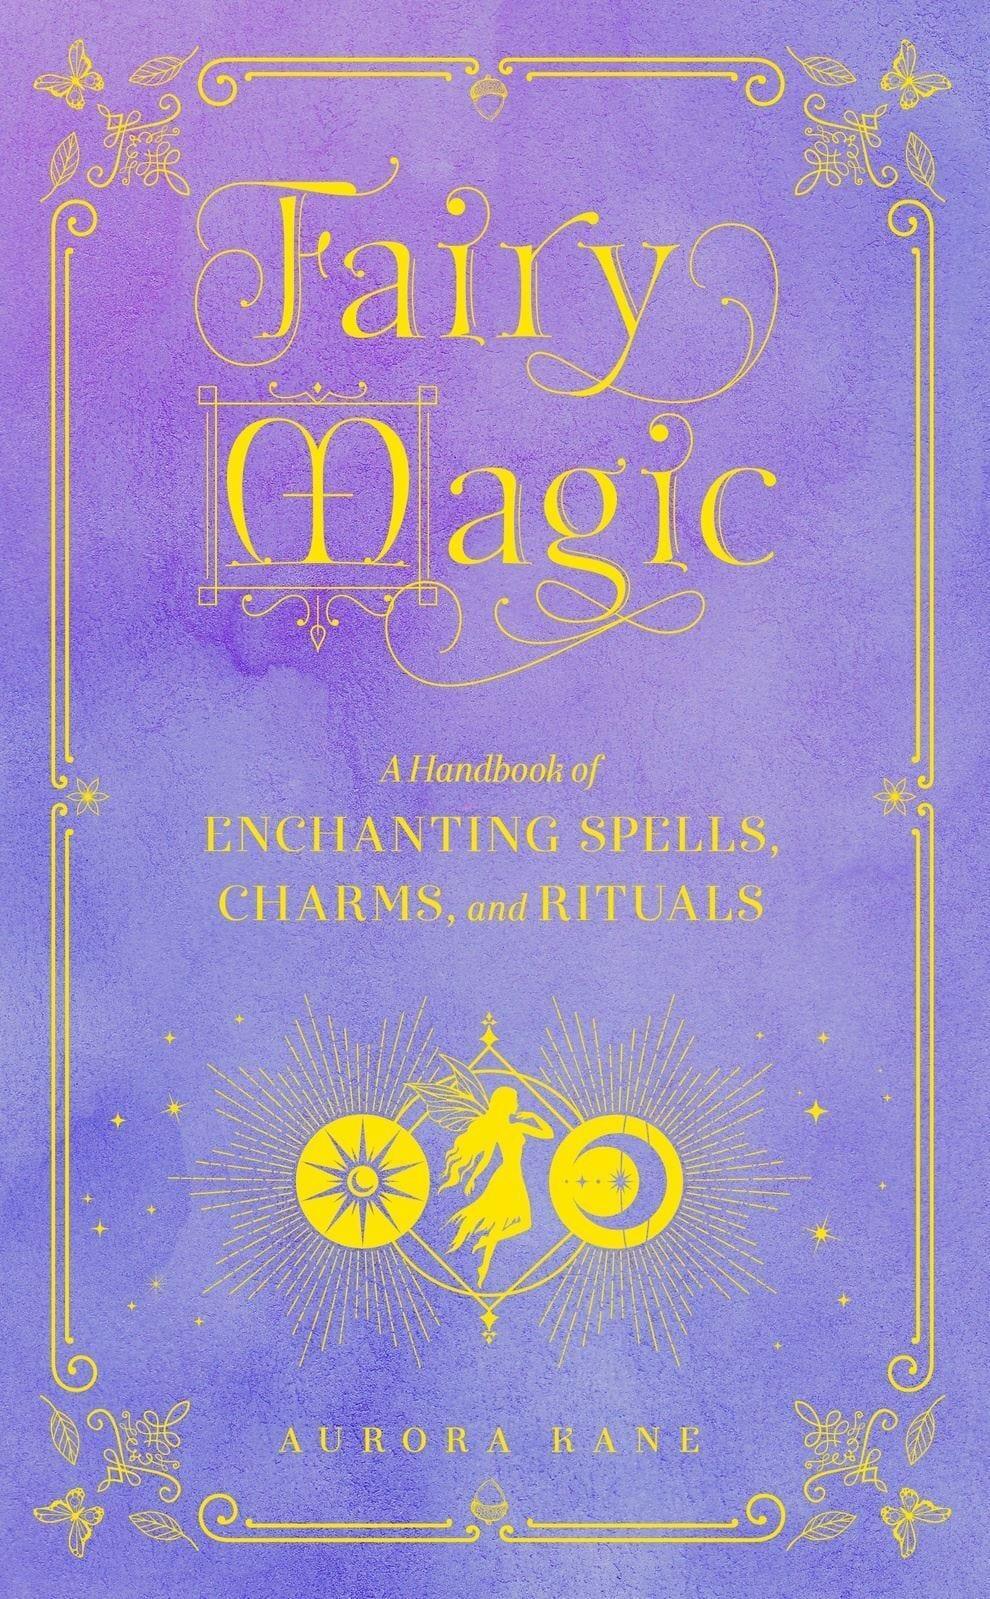 Fairy Magic: A Handbook of Enchanting Spells, Charms, and Rituals: Volume 11 - Inspire Me Naturally 